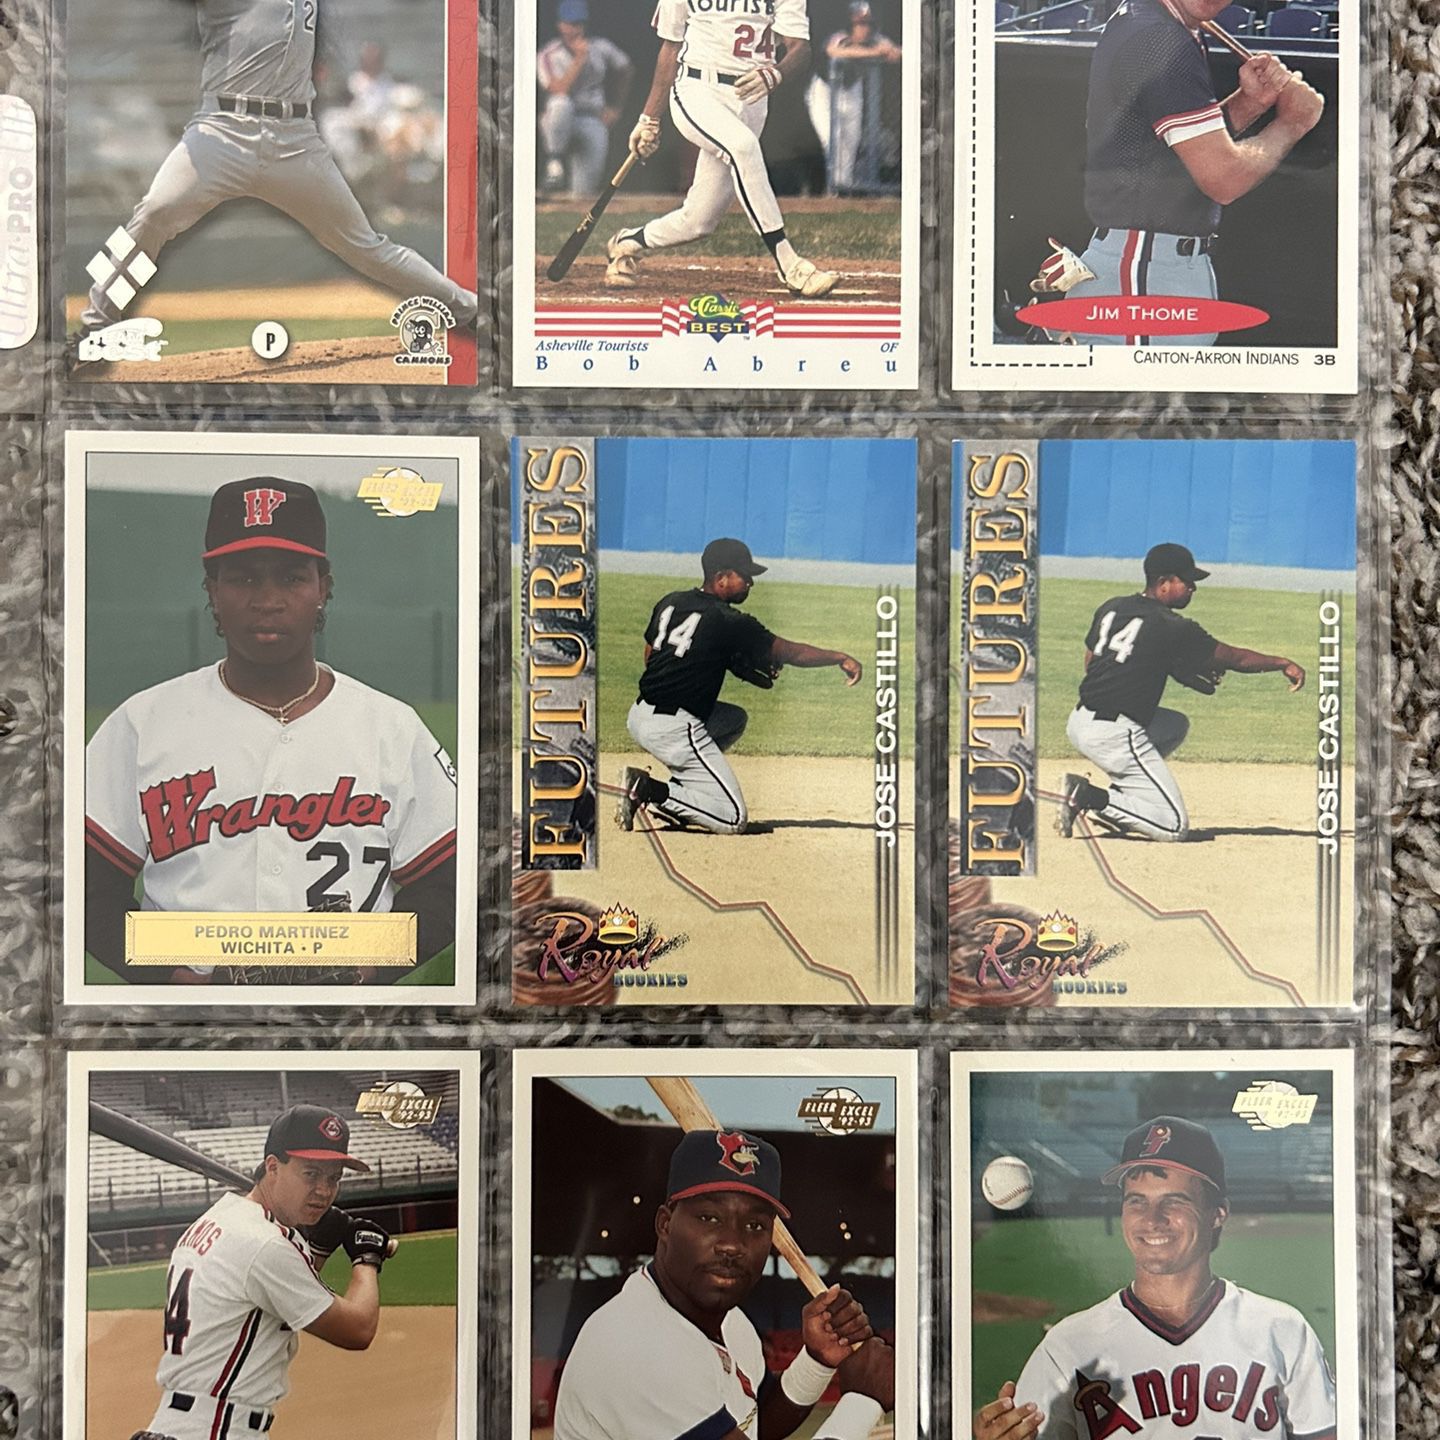 Minor League Baseball Cards - 828 Cards (1989 To 2002)